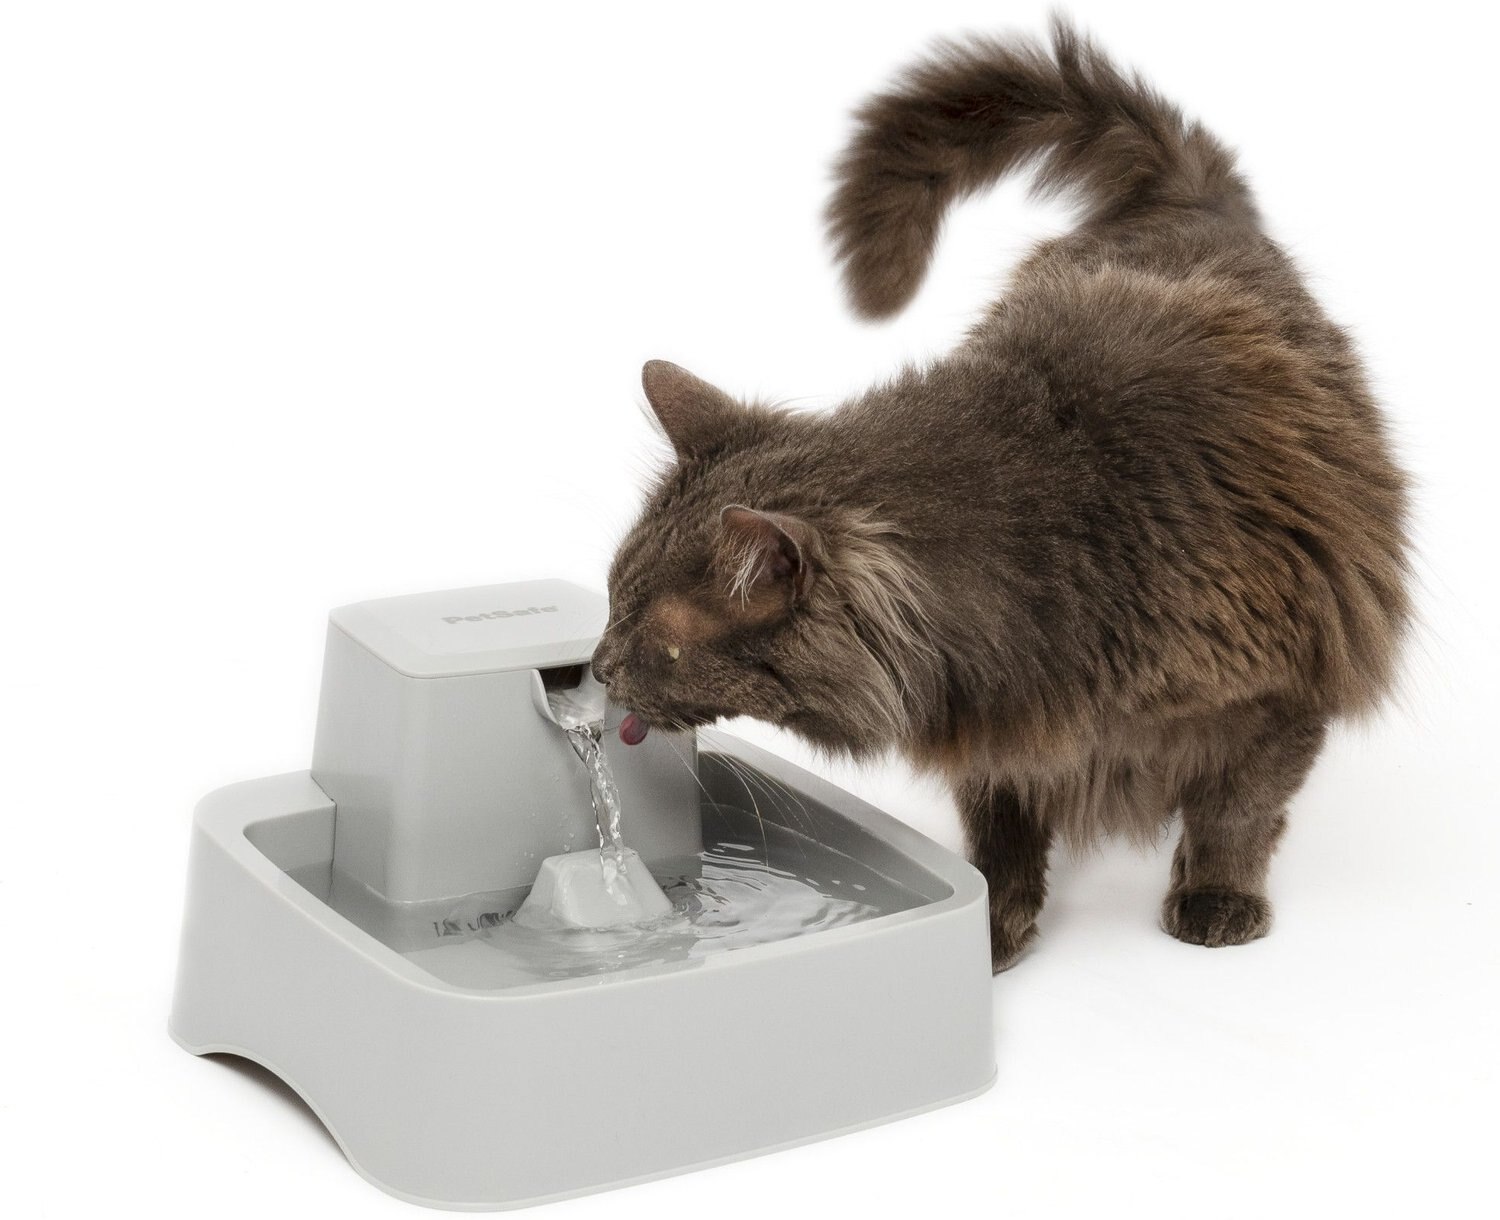 petsafe drinkwell 2 gallon dog and cat water fountain